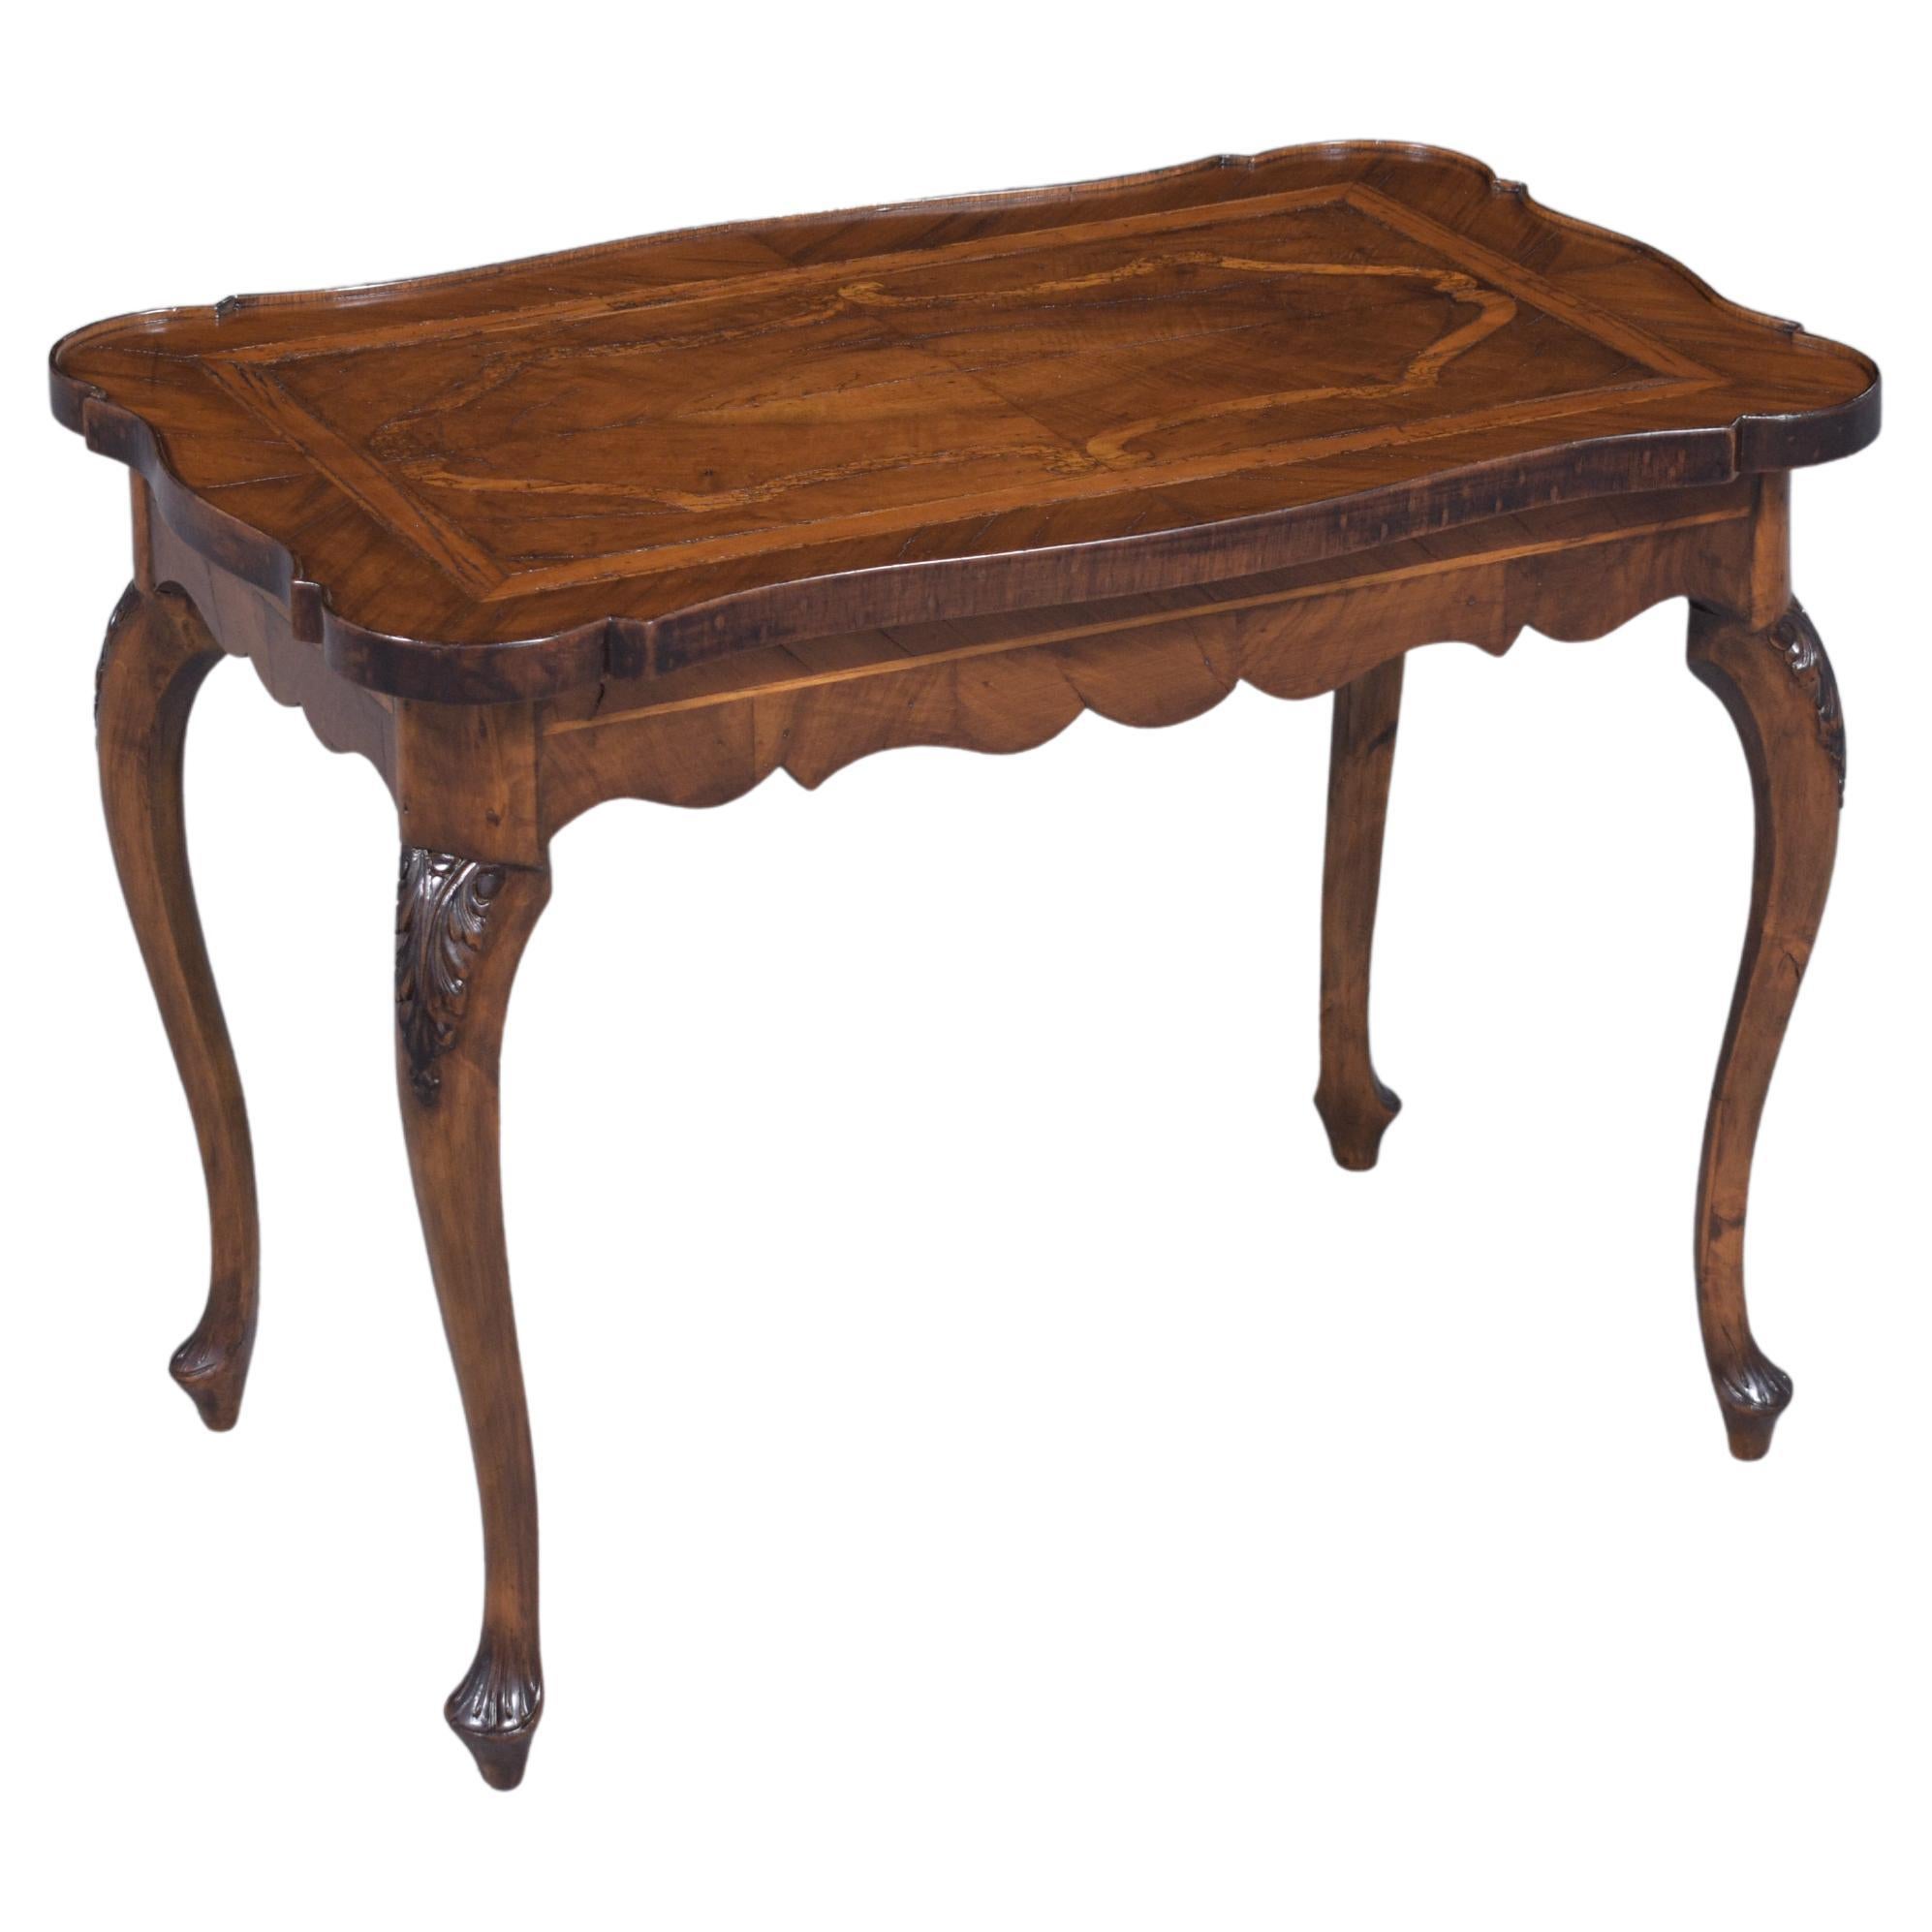 Late 19th-Century English Walnut Side Table with Inlaid Pattern